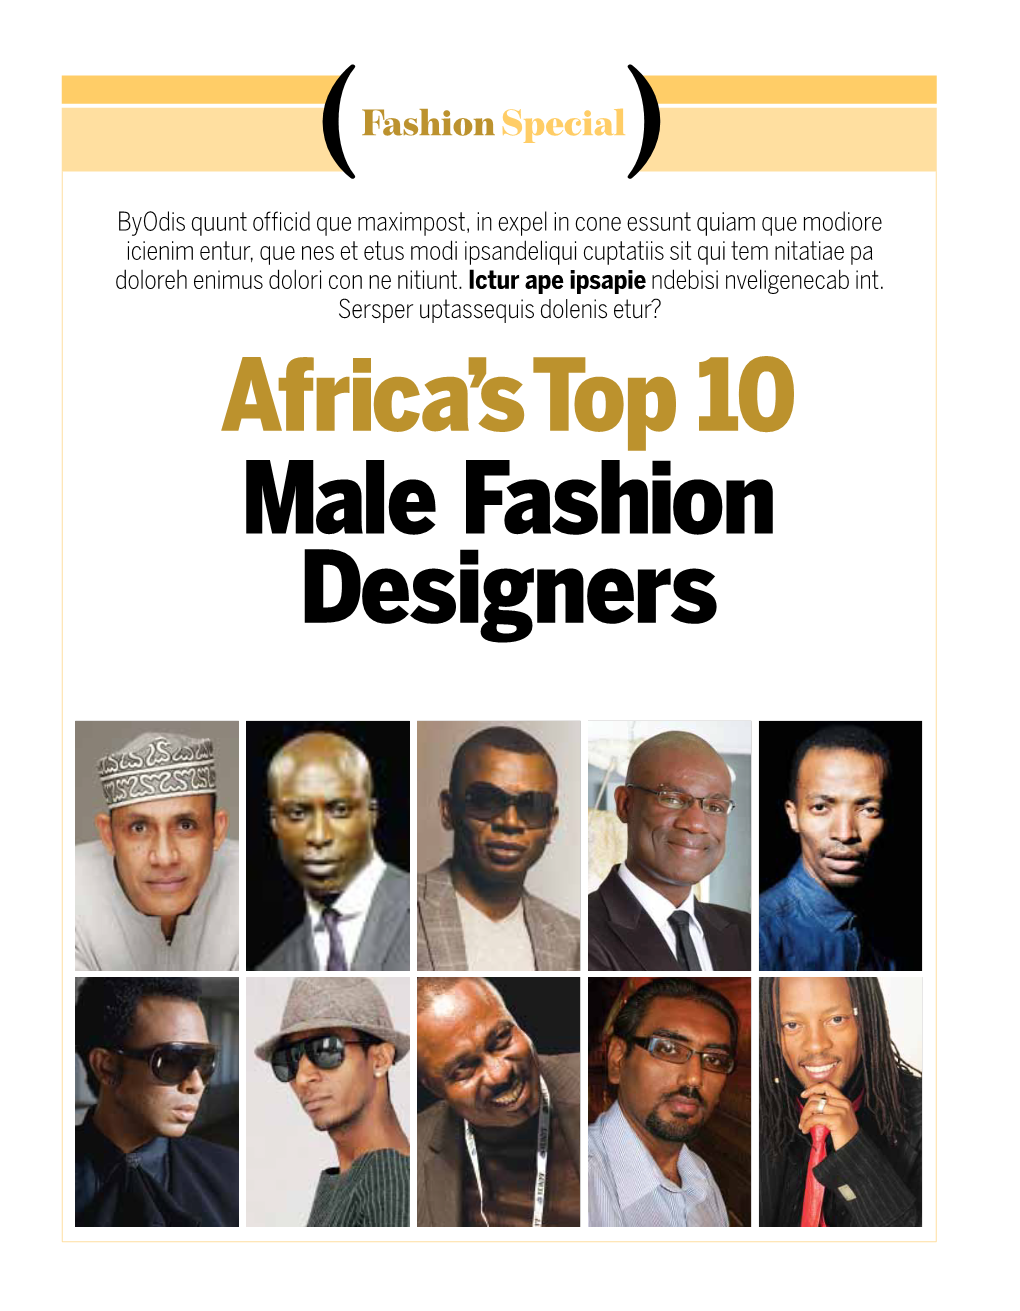 Africa's Top 10 Male Fashion Designers